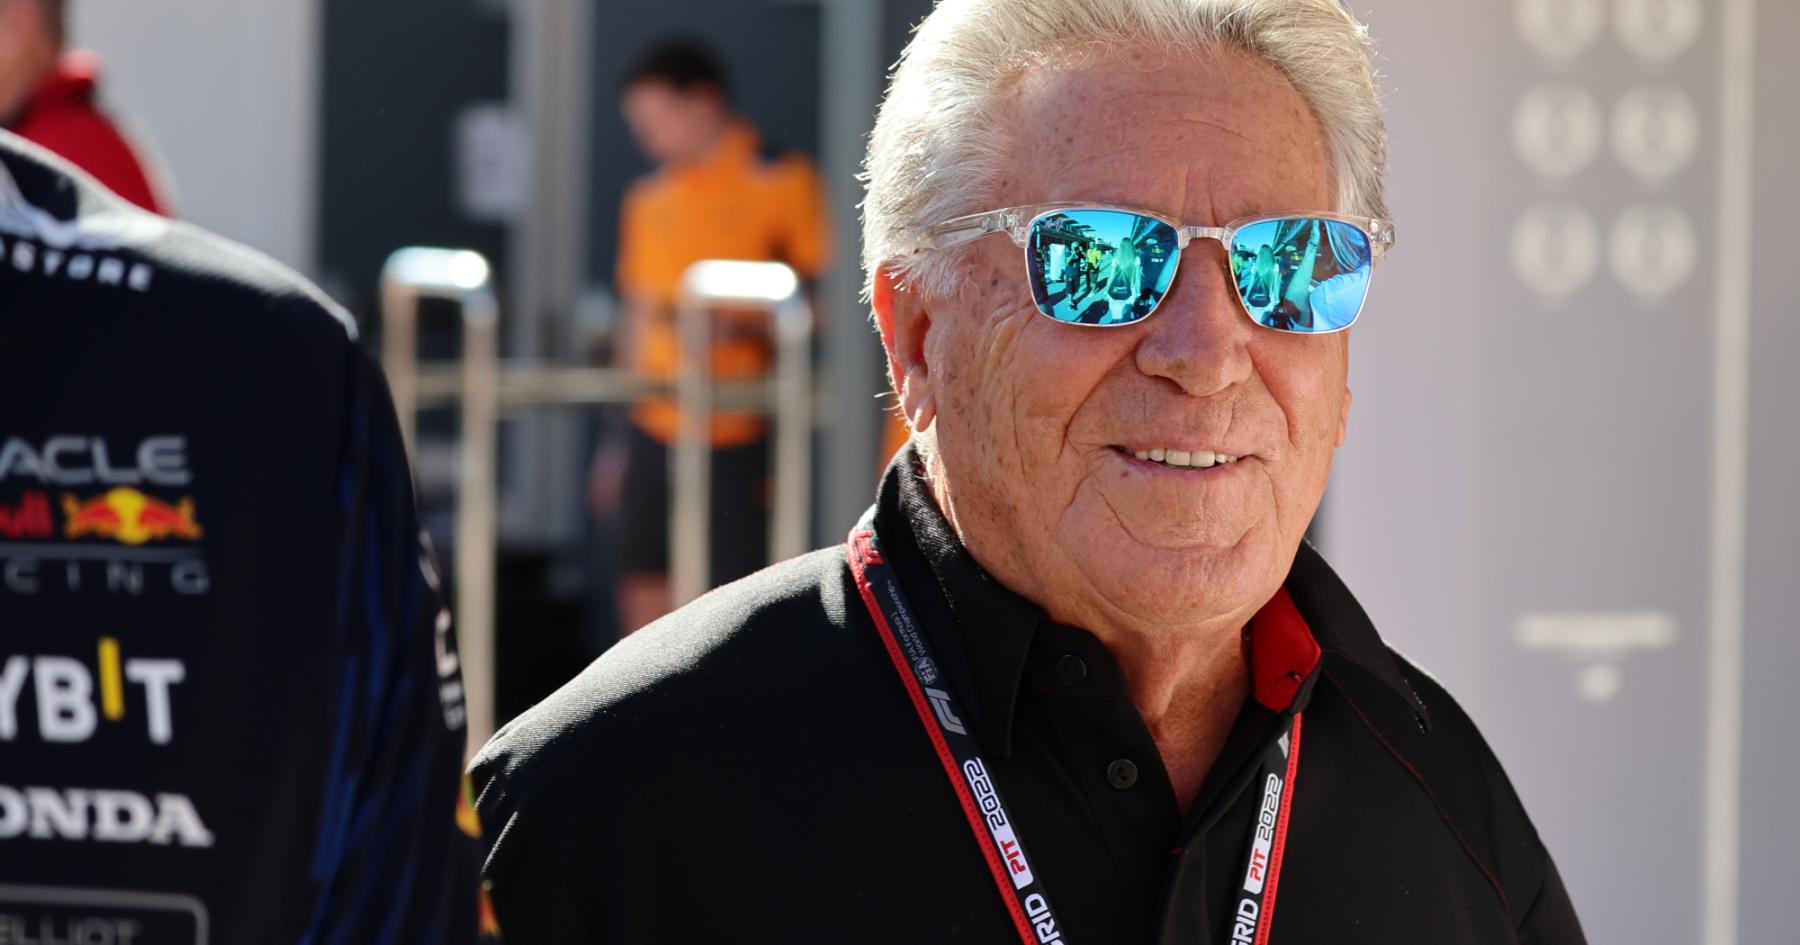 Champion's Resolve: Andretti's Defiant Quest for F1 Entry Triumphs Against All Odds